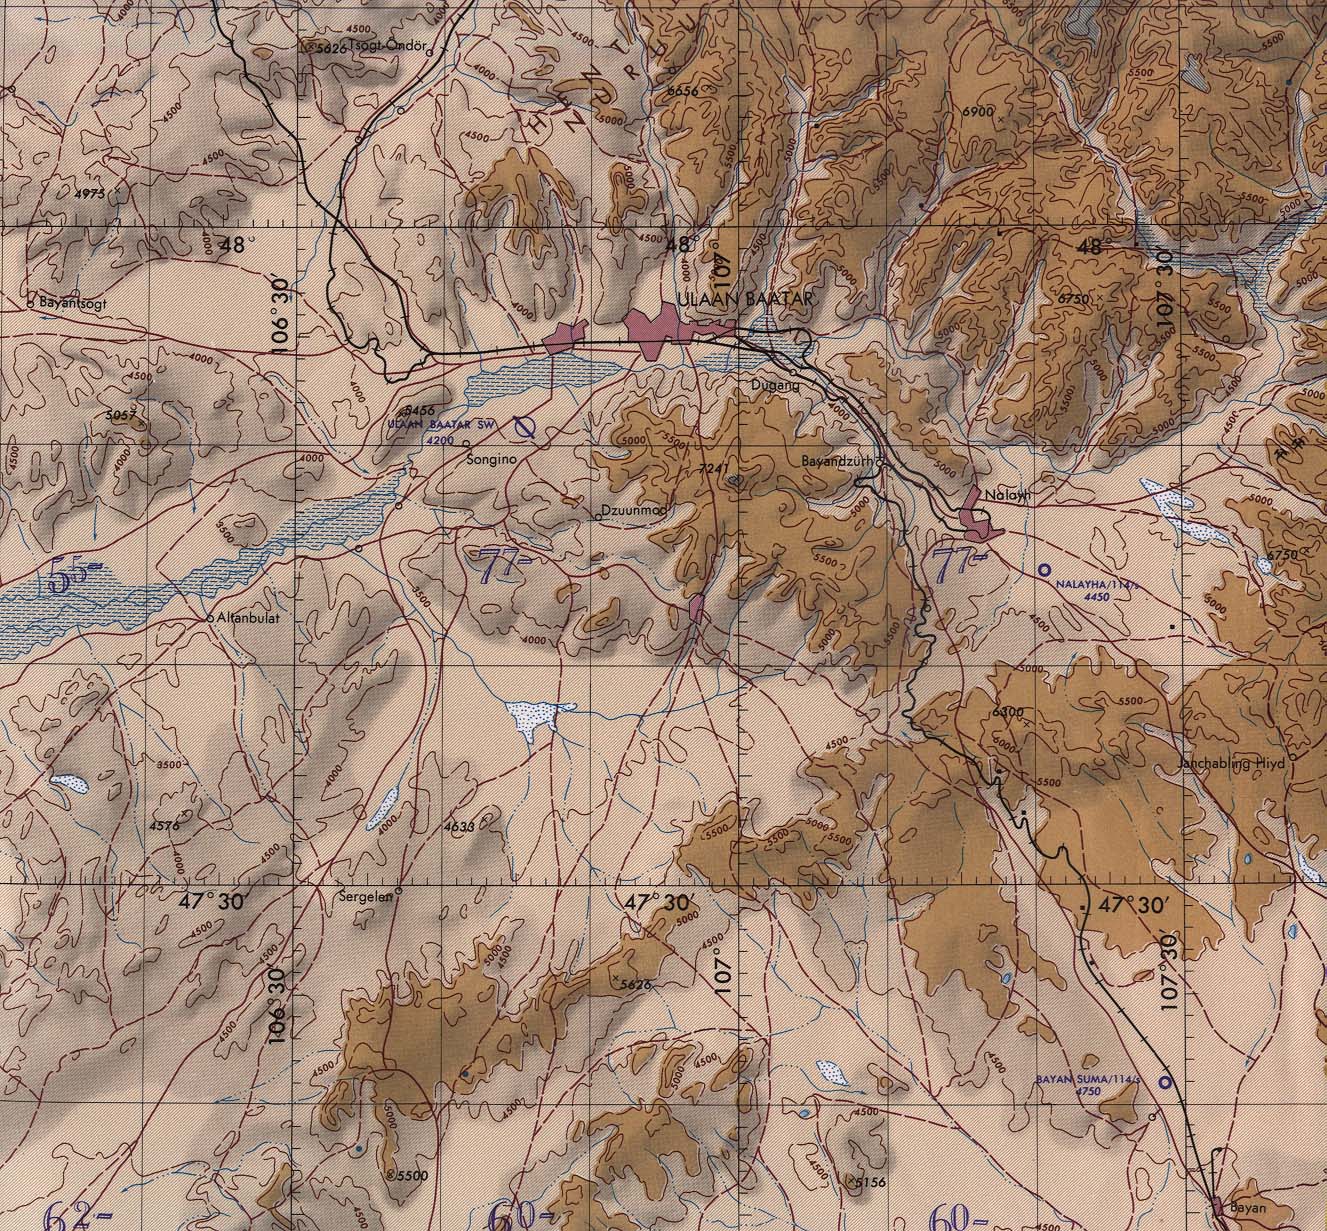 Map Of Mongolia , Ulaan Baatar [Ulan Bator] (tactical pilotage chart) original scale 1:500,000 Portion of Defense Mapping Agency TPC F-8A 1989 (645K) Not for navigational use 